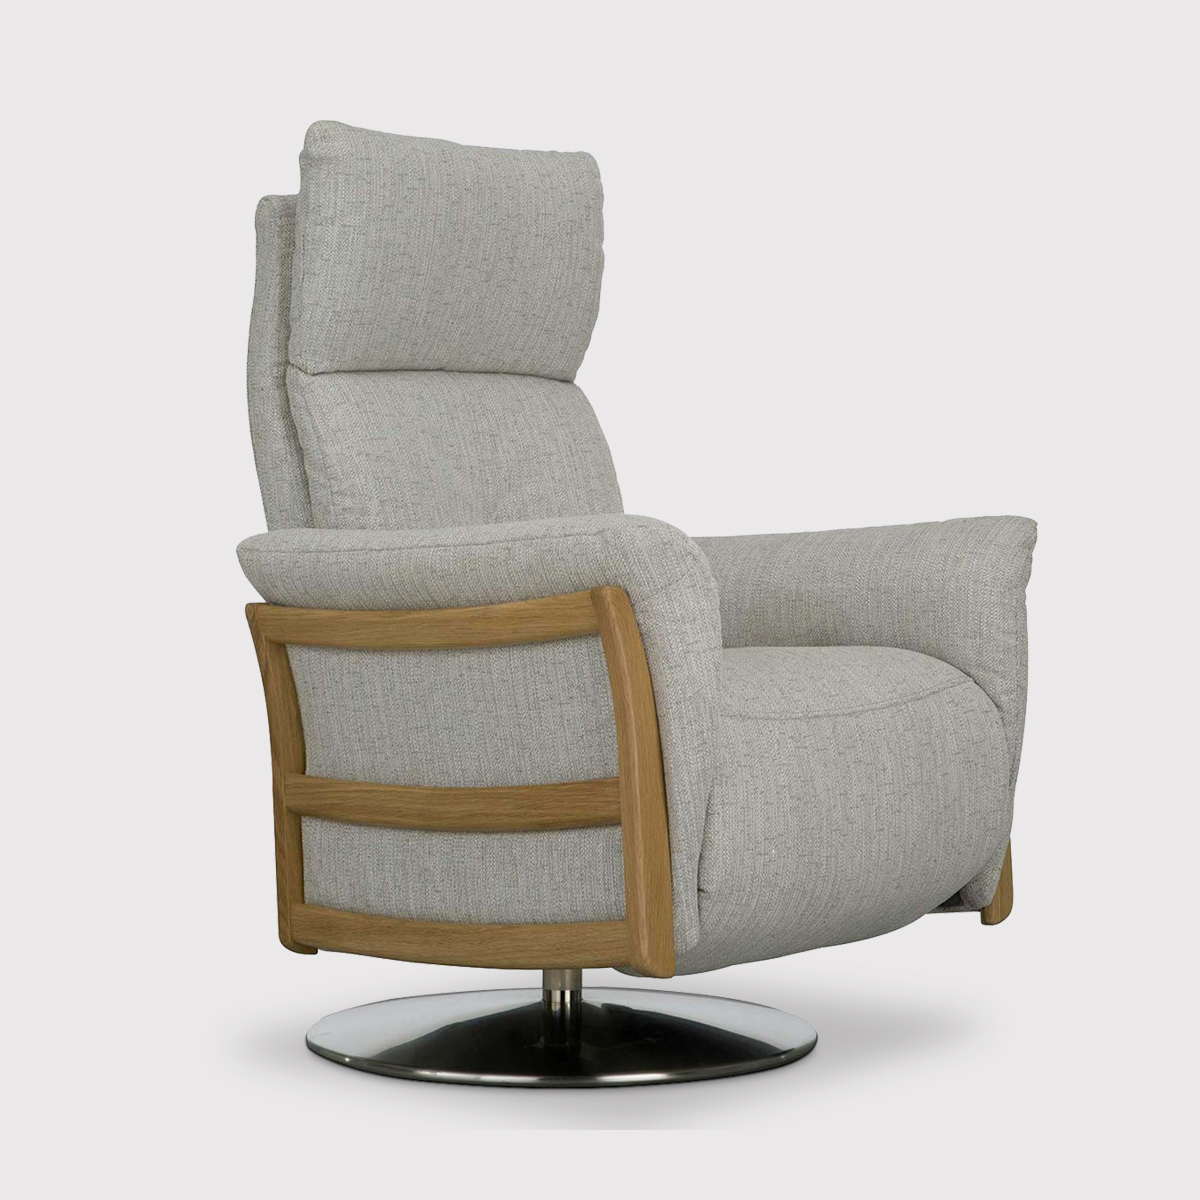 Ercol Ginosa Recliner, Grey Leather | Barker & Stonehouse